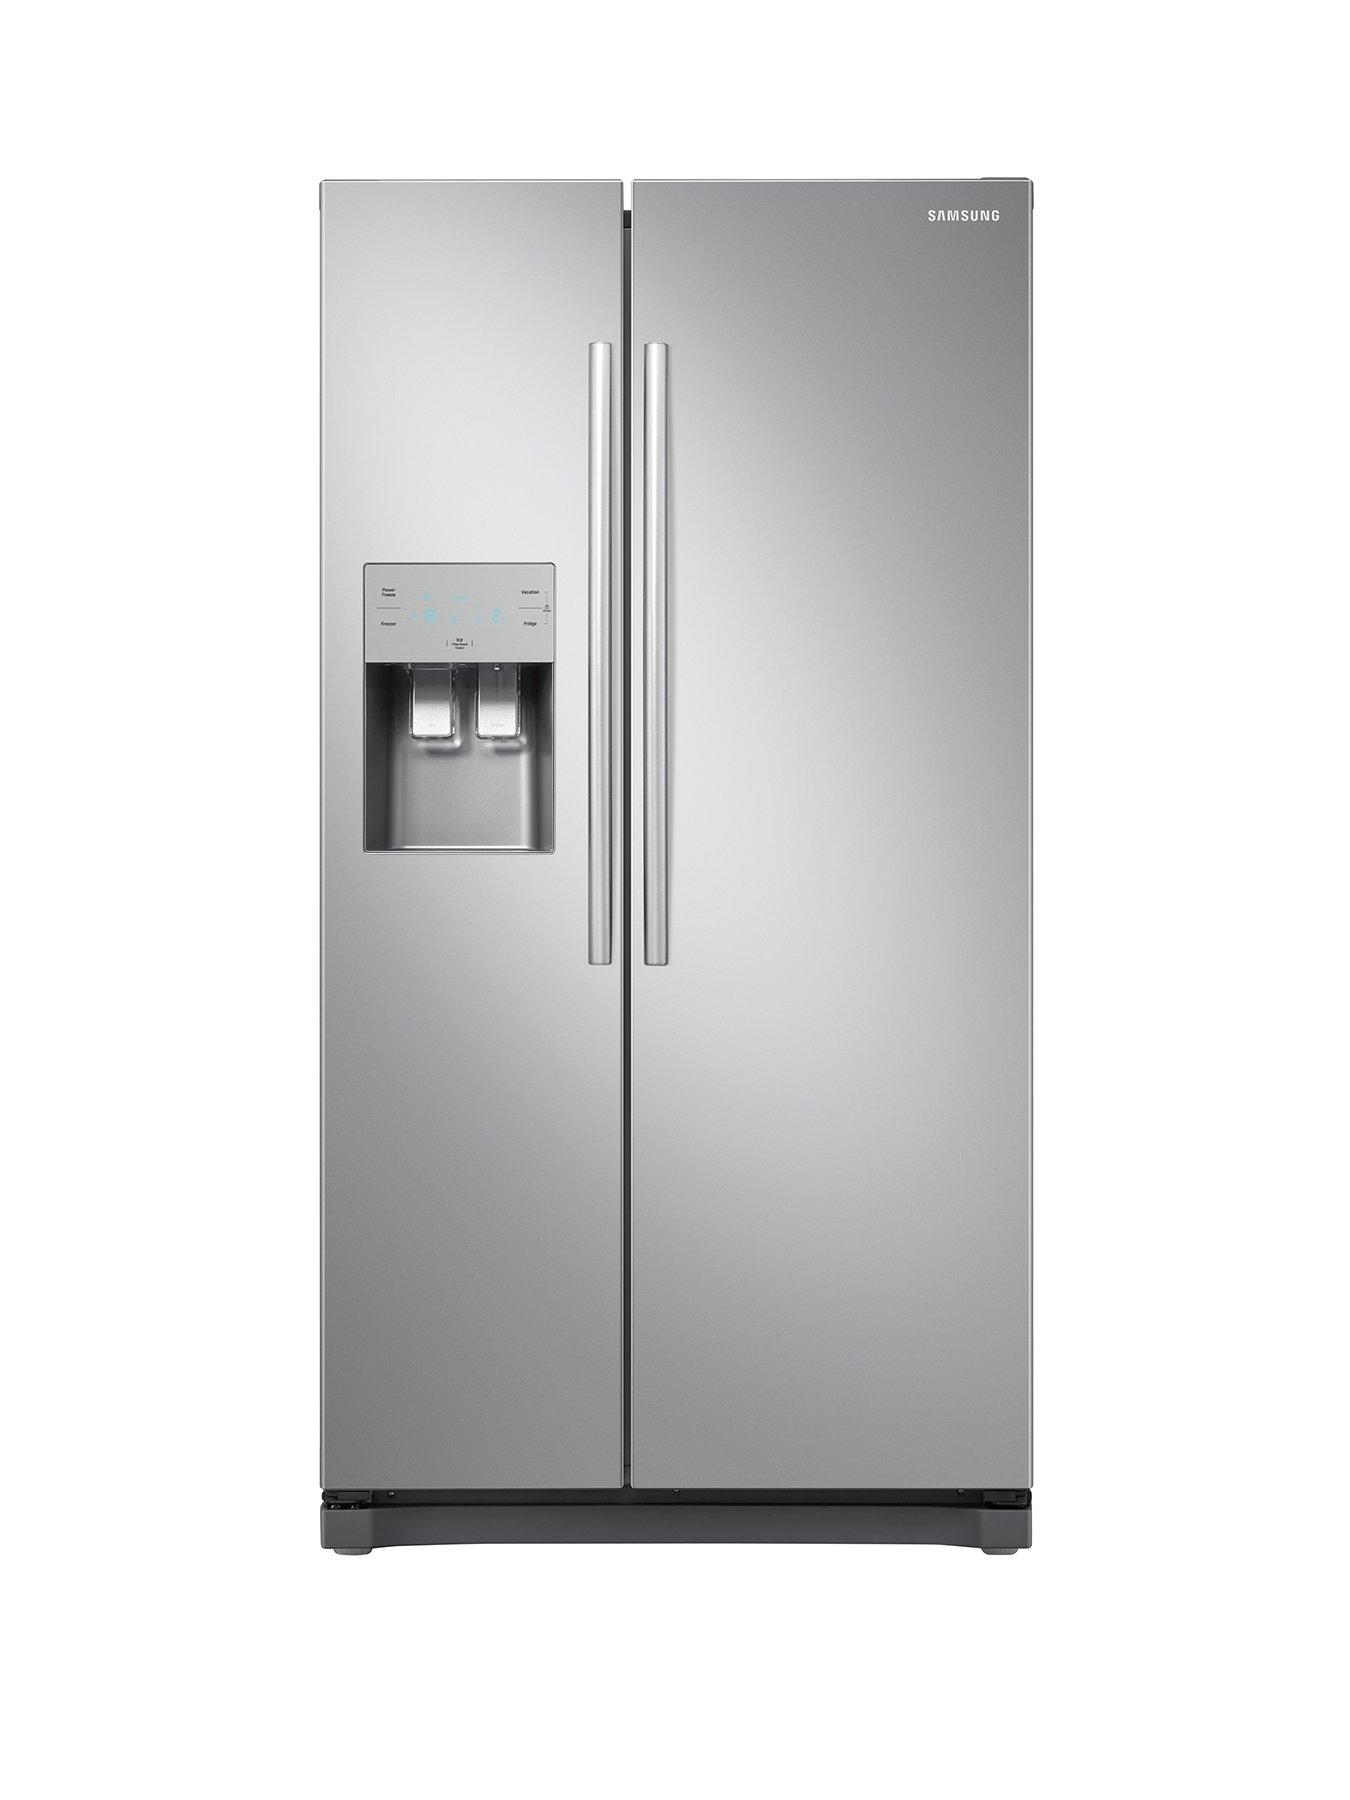 Samsung Rs50N3513Sa/Eu American Style Frost Free Fridge Freezer With Plumbed Water, Ice Dispenser And 5 Year Samsung Parts And Labour Warranty – Graphite